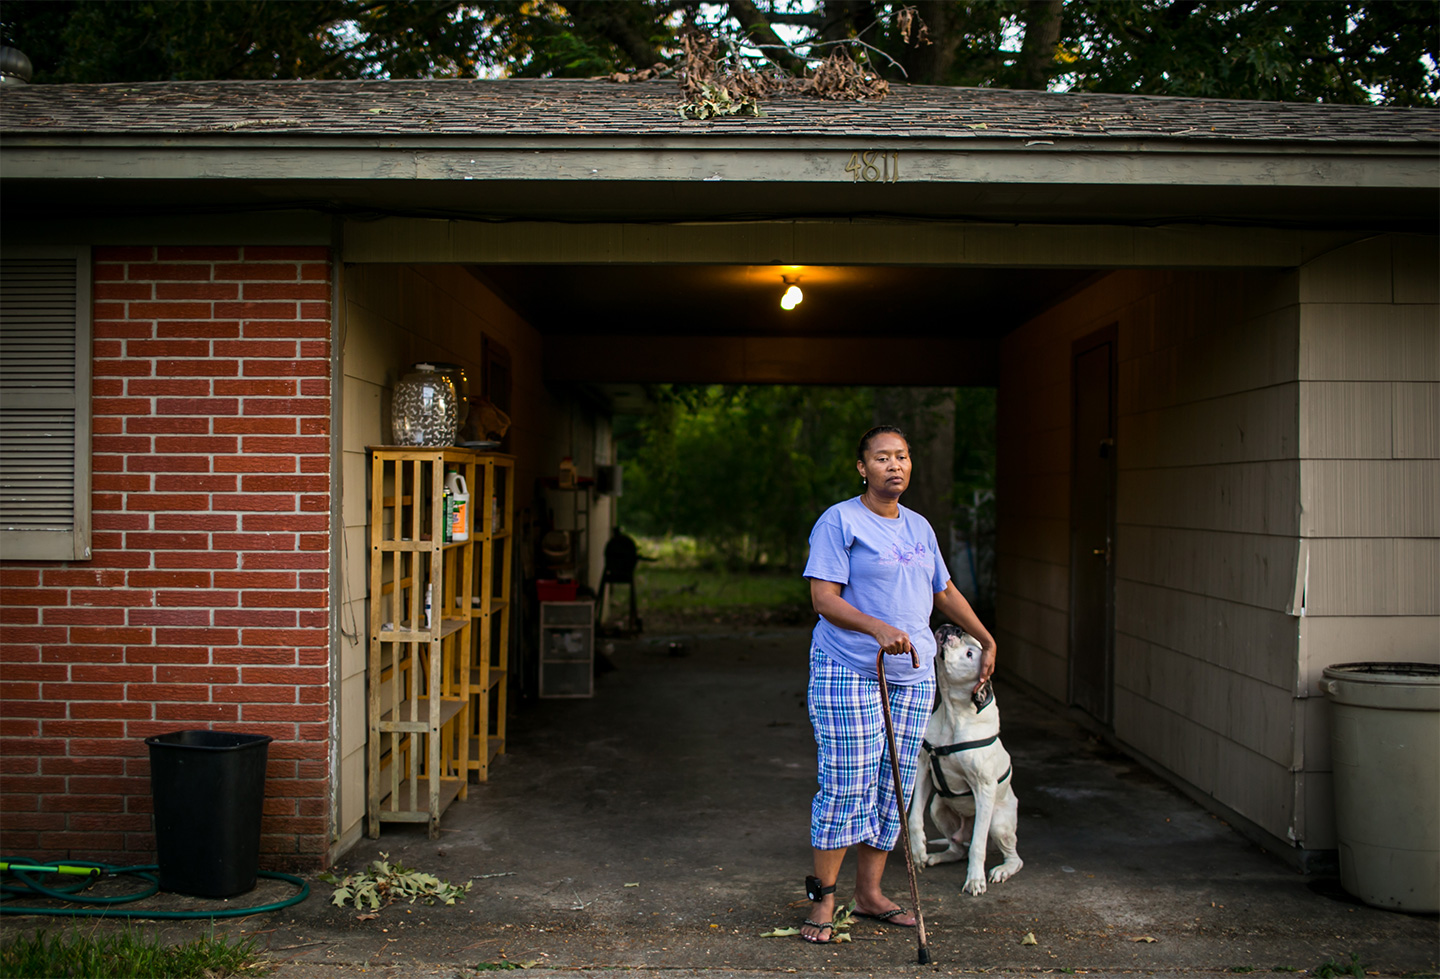 Tennie White outside of her home in Jackson, Mississippi. Currently on house arrest after 32 months in prison, Tennie cannot walk farther than her mailbox. Ms. White helped to uncover contaminated areas from the Kerr McGee site and was later charged with tampering with evidence during court trials against the company for environmental pollution. During her prison sentencing, the judge assured Tennie she would receive medical attention for her cataracts, for which she was already planning to undergo surgery. Being refused the appropriate medical care, she is now legally blind after being released to her home.